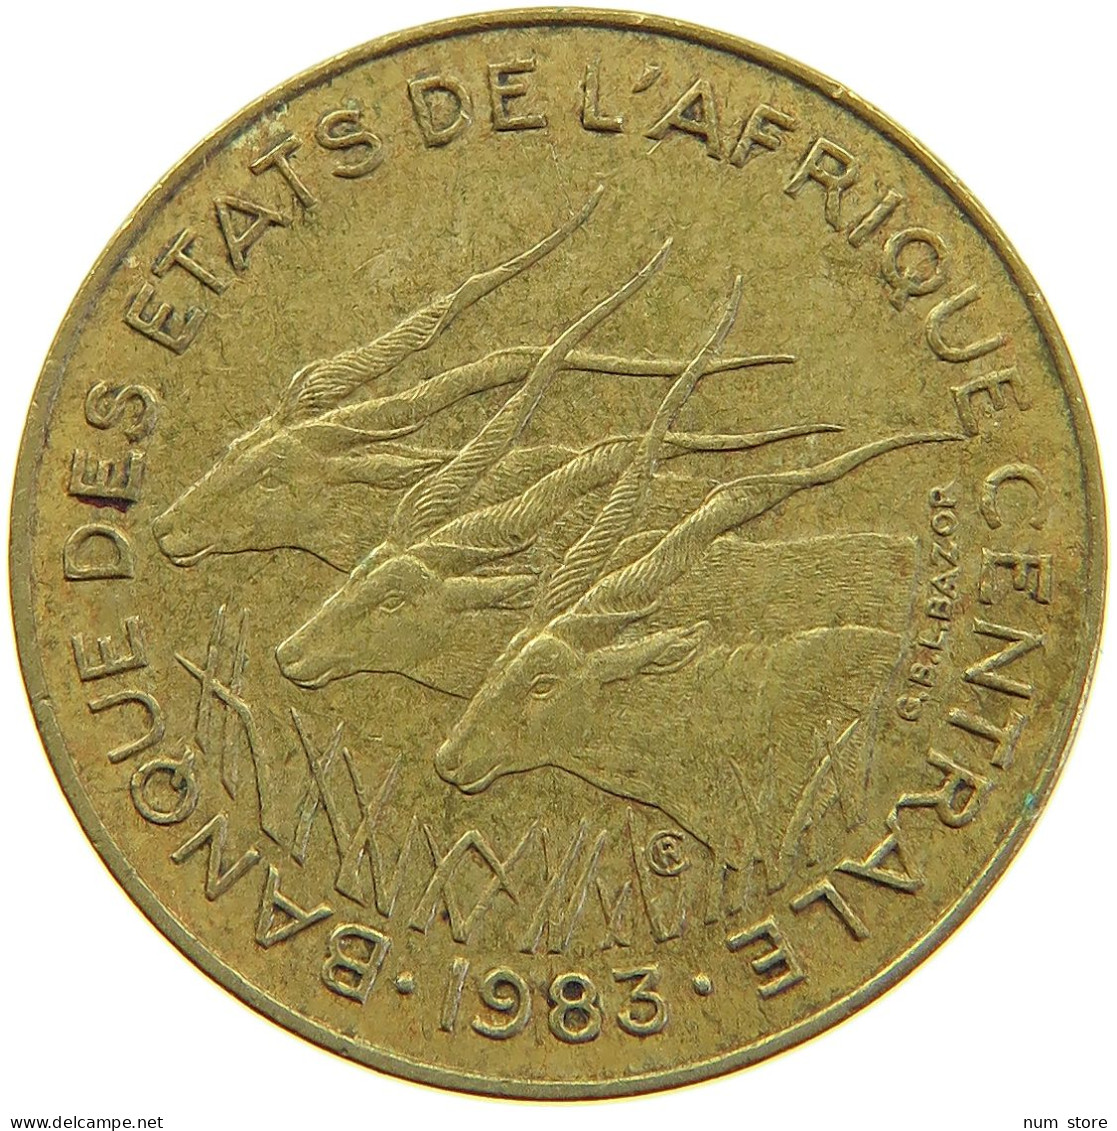 CENTRAL AFRICAN STATES 5 FRANCS 1983  #c067 0437 - Centraal-Afrikaanse Republiek